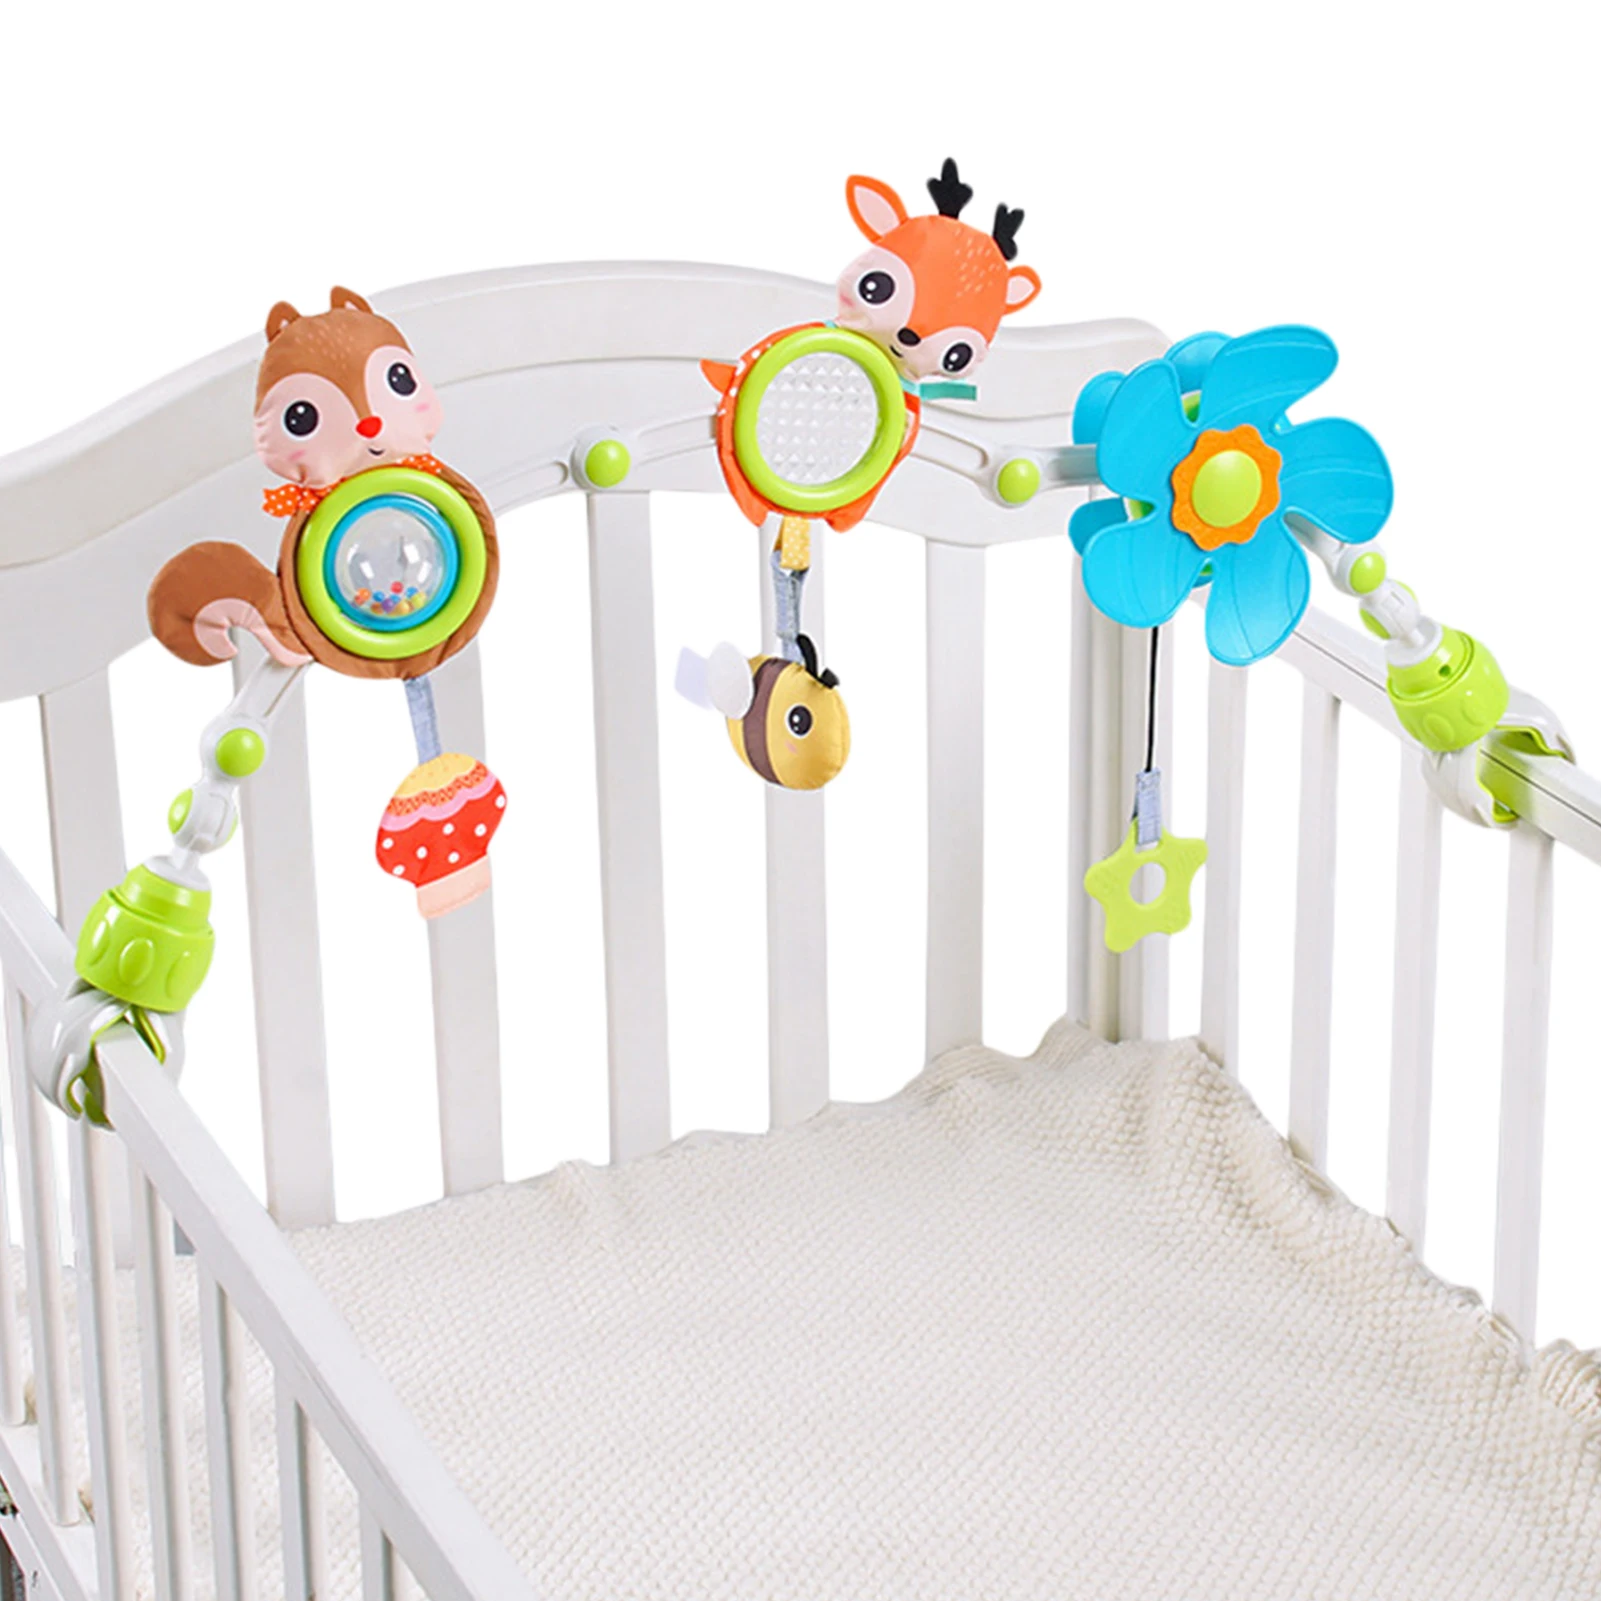 

Stroller Toys Stroller Arch Clip On Crib Carseat Toys Baby Toys 6 To 12 Months Deer Theme Arch Shape Baby Toys